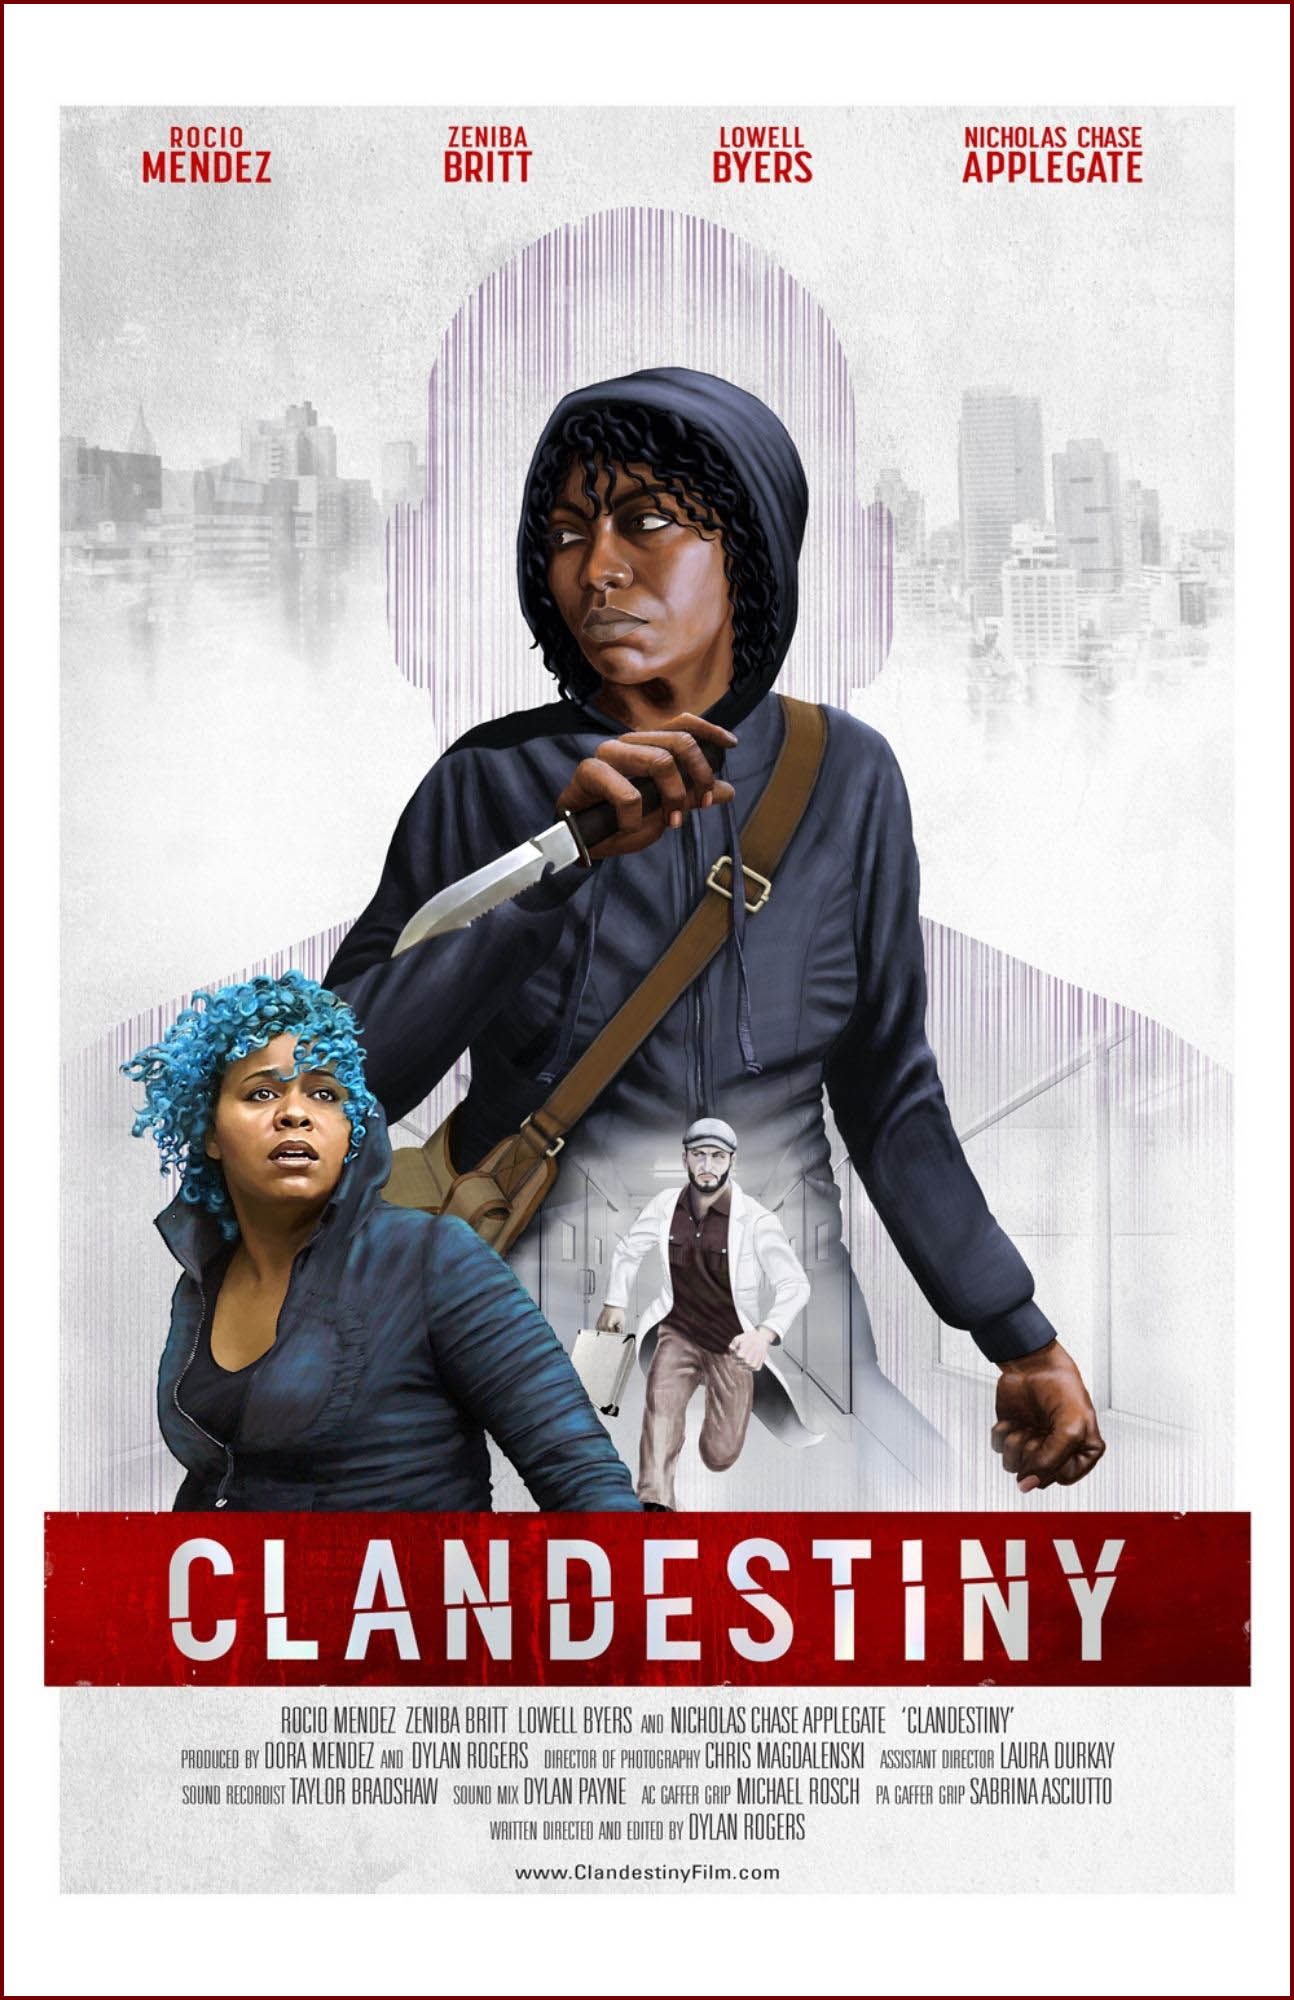 CLANDESTINY, Dylan Rogers, writer, director, producer